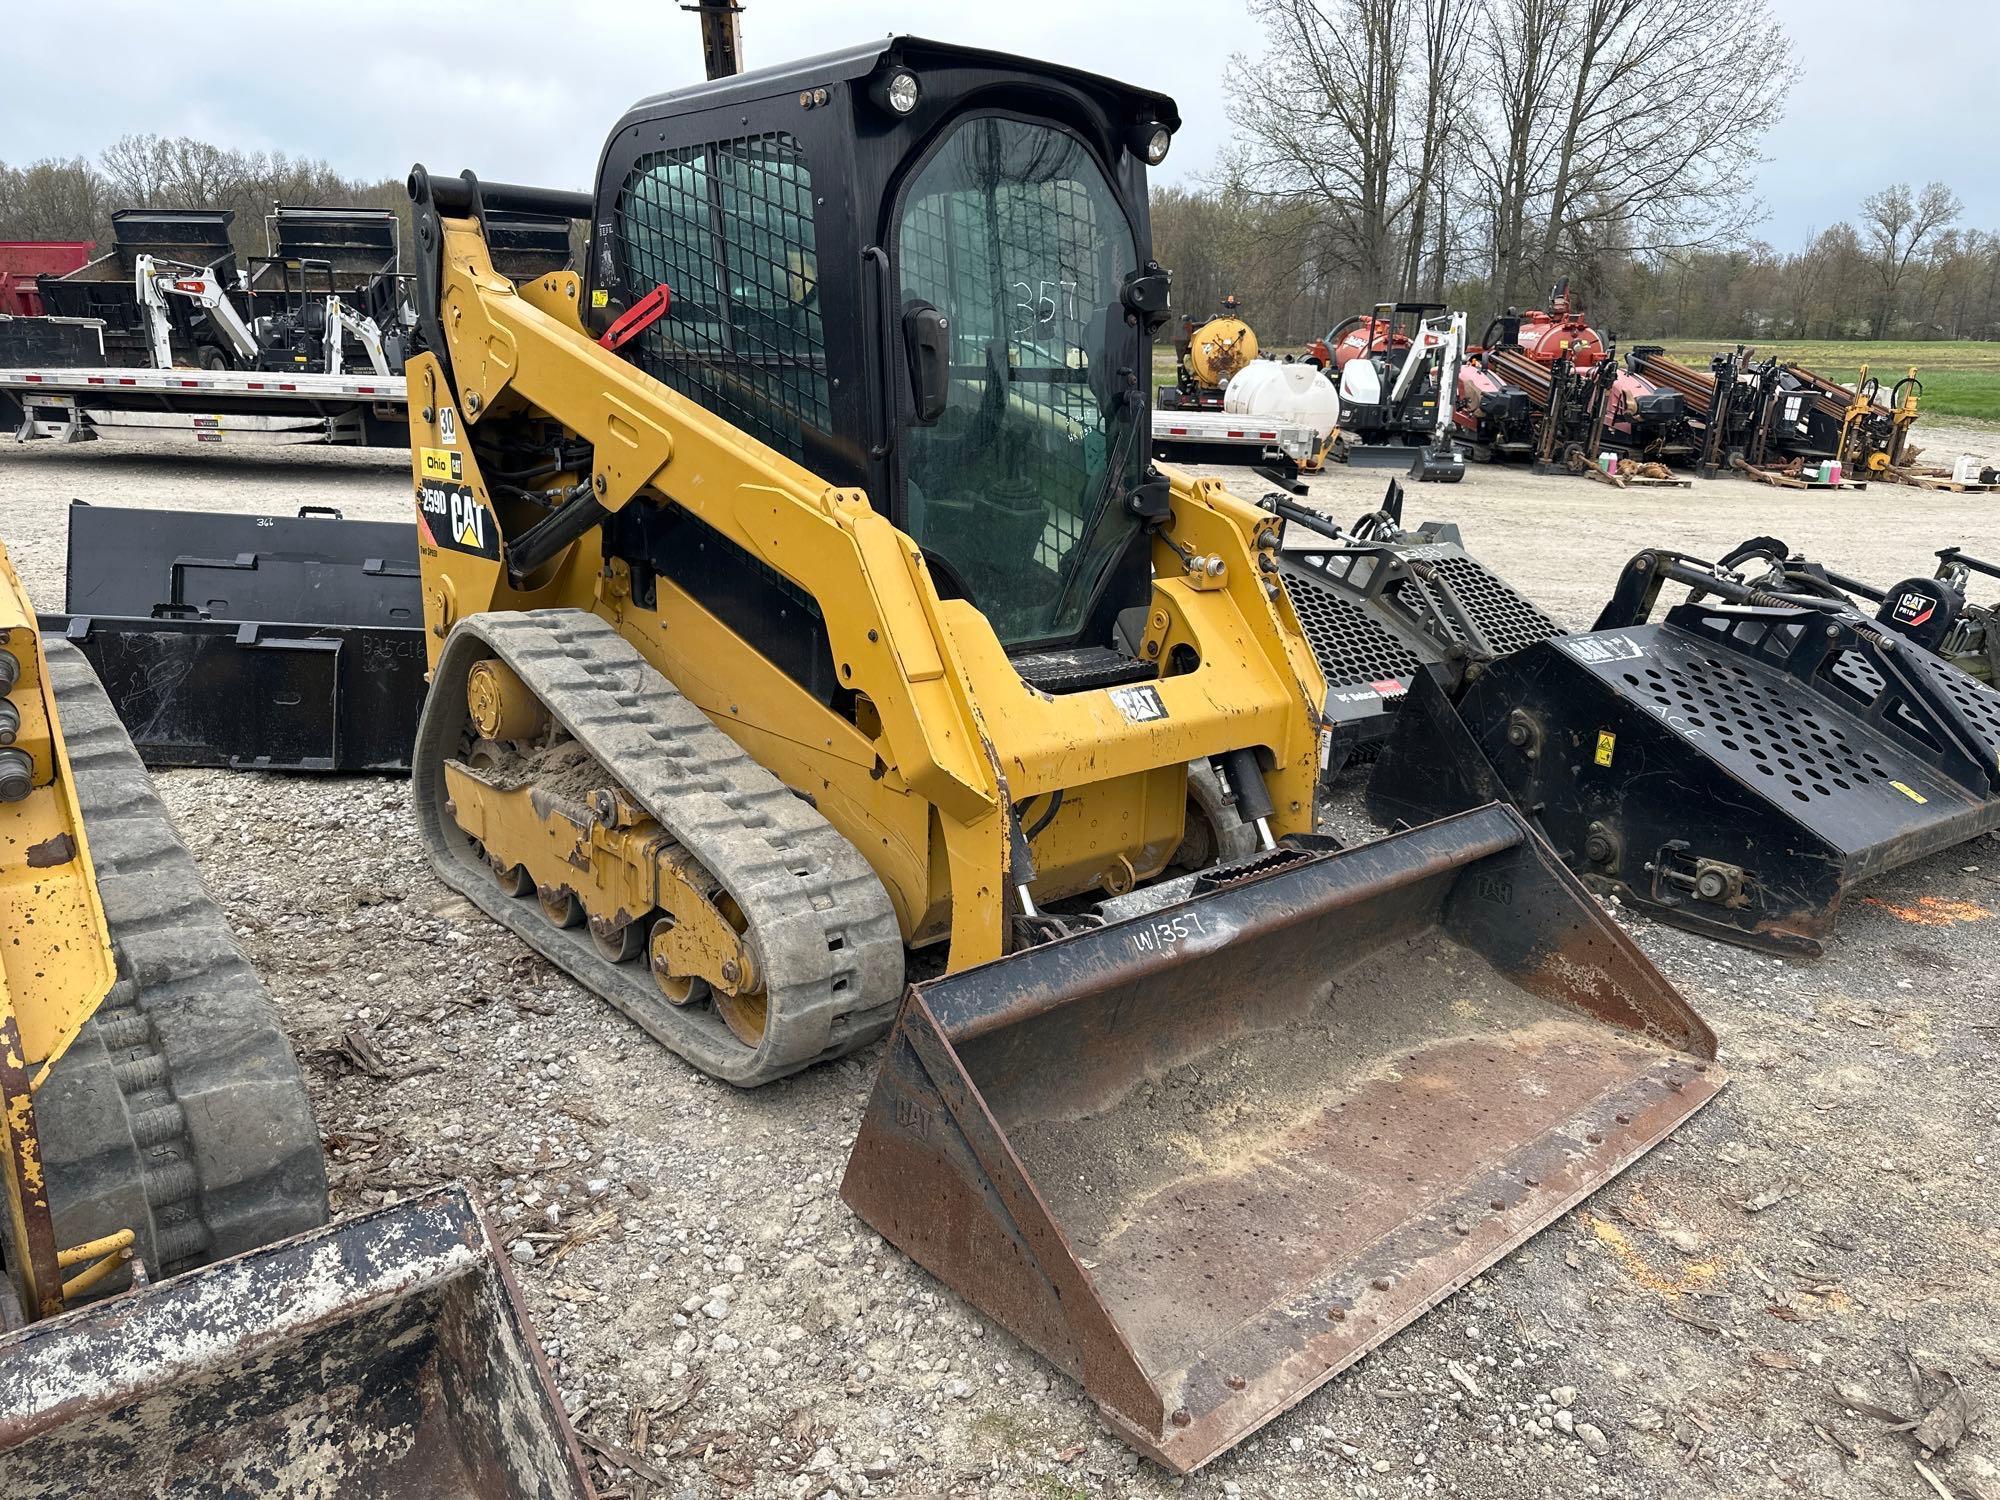 2014 CAT 259D RUBBER TRACKED SKID STEER SN:FTL00615 powered by Cat C3.3B diesel engine, equipped